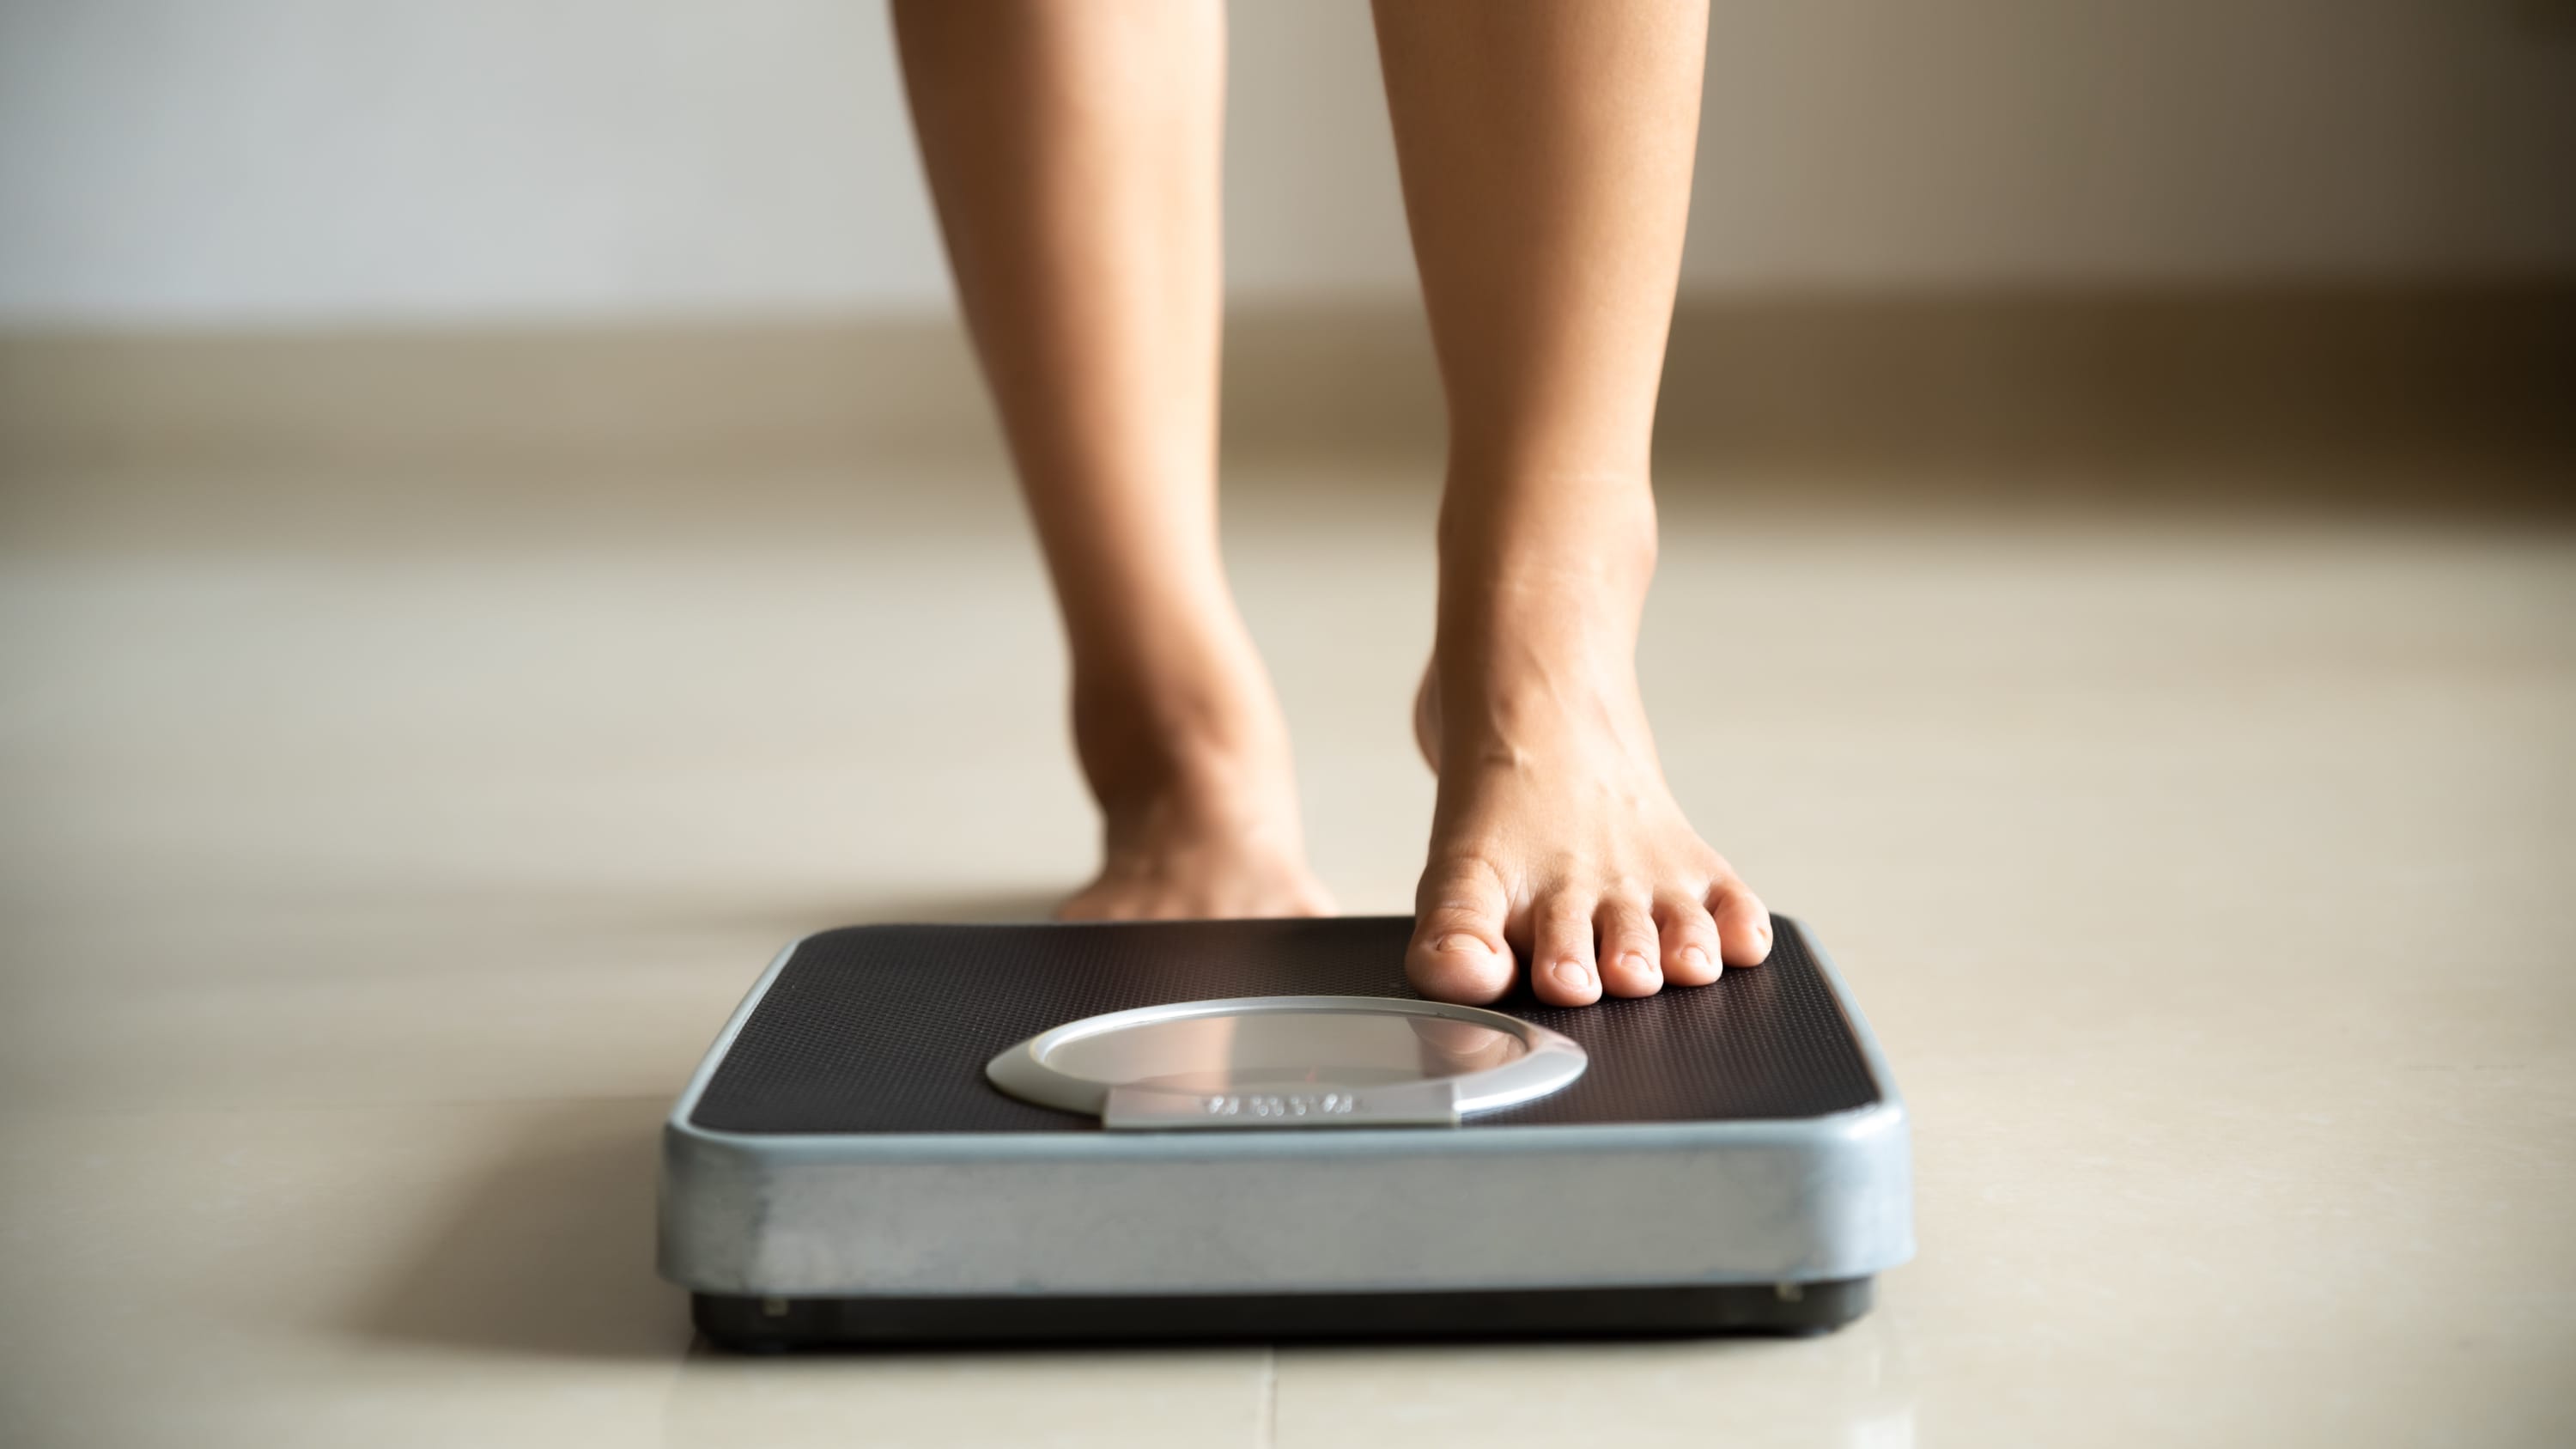 woman stepping on the scale, hoping for weight loss